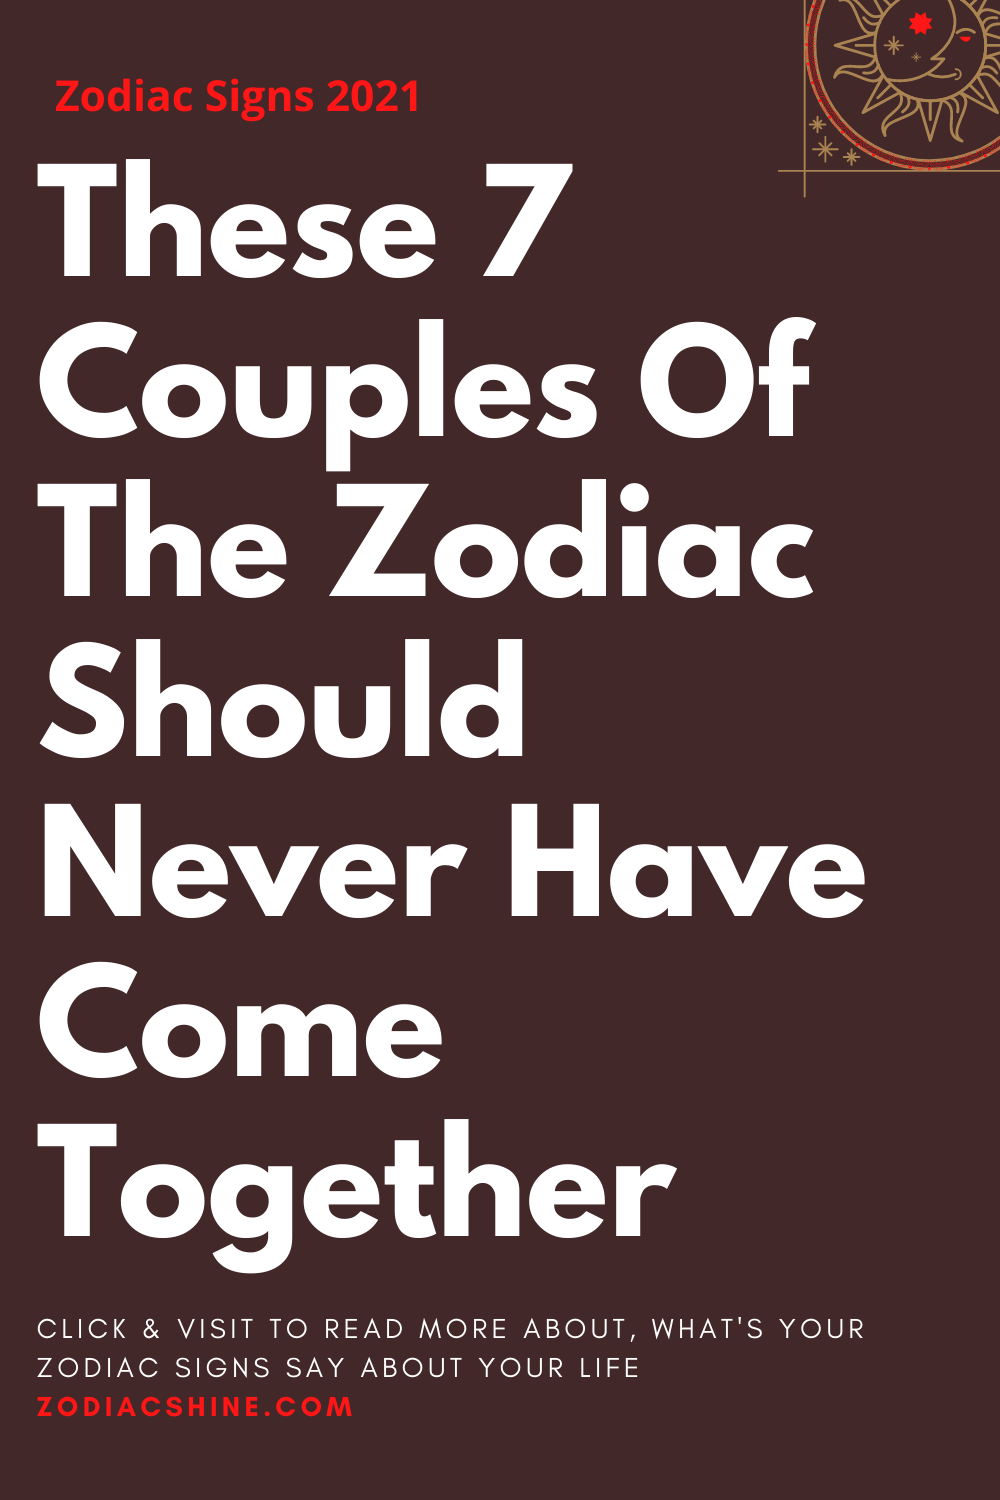 These 7 Couples Of The Zodiac Should Never Have Come Together